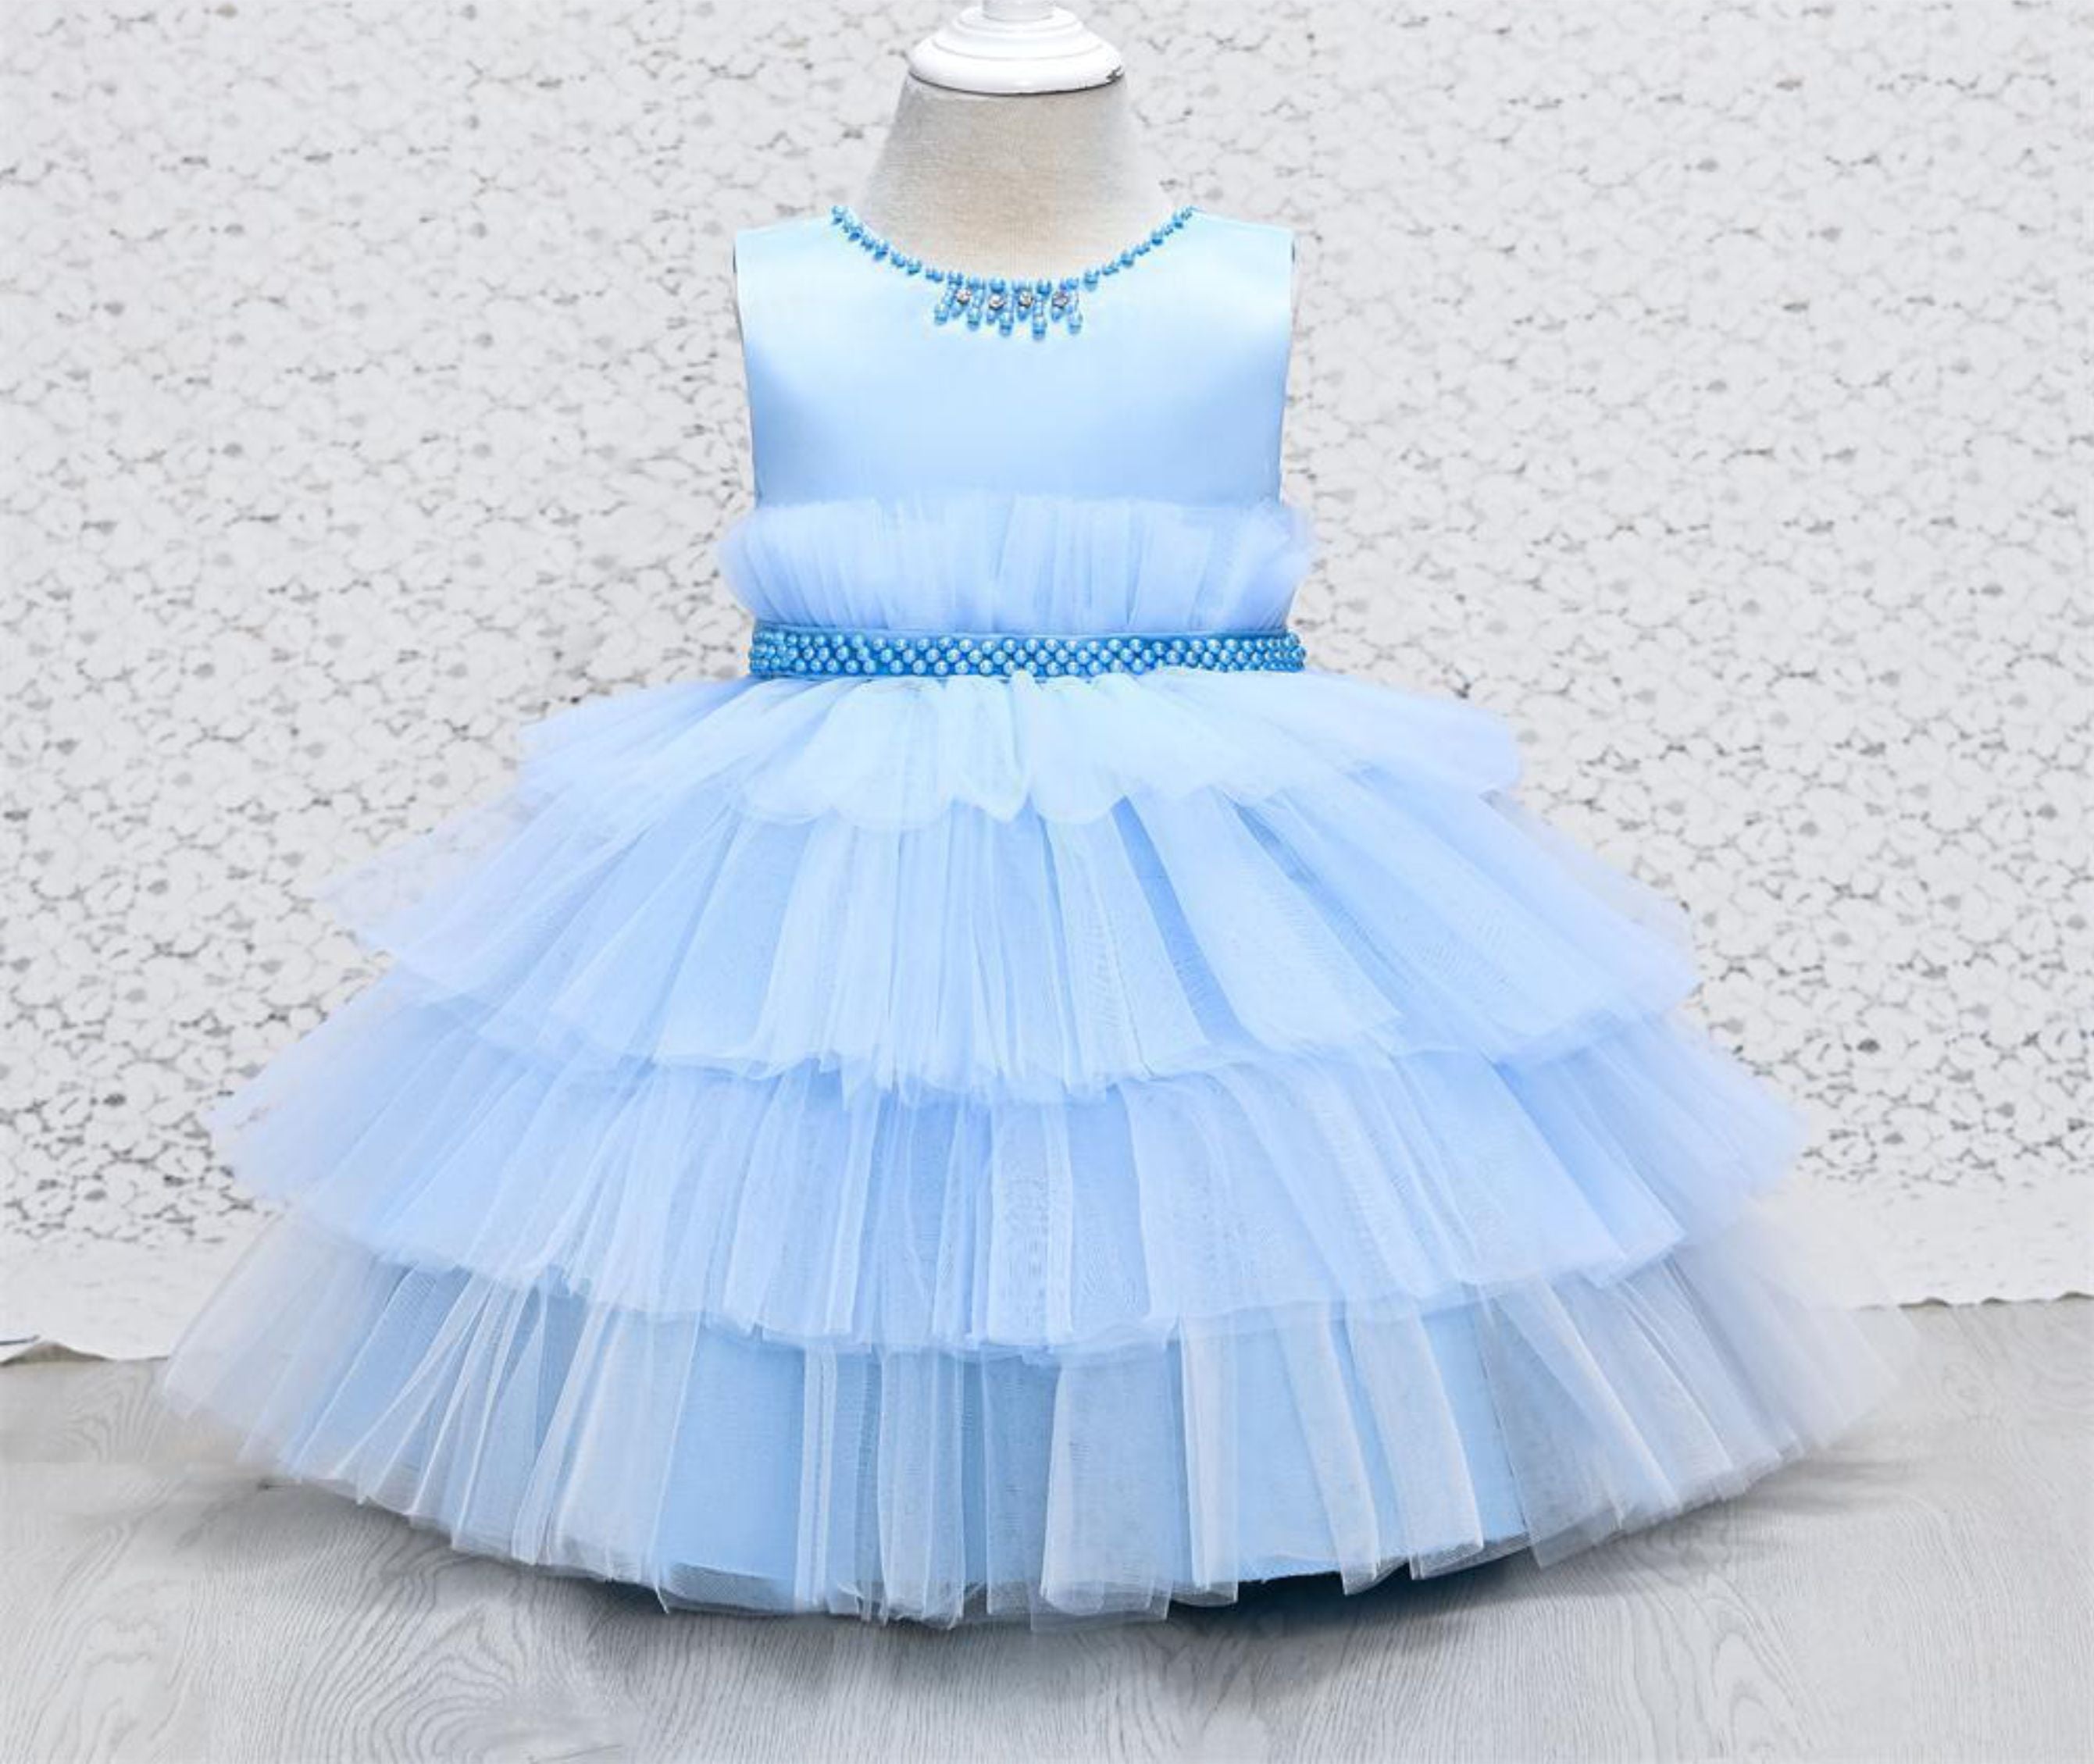 Lace Applique Beaded Flower Girl Dress With Back Bow-Knot